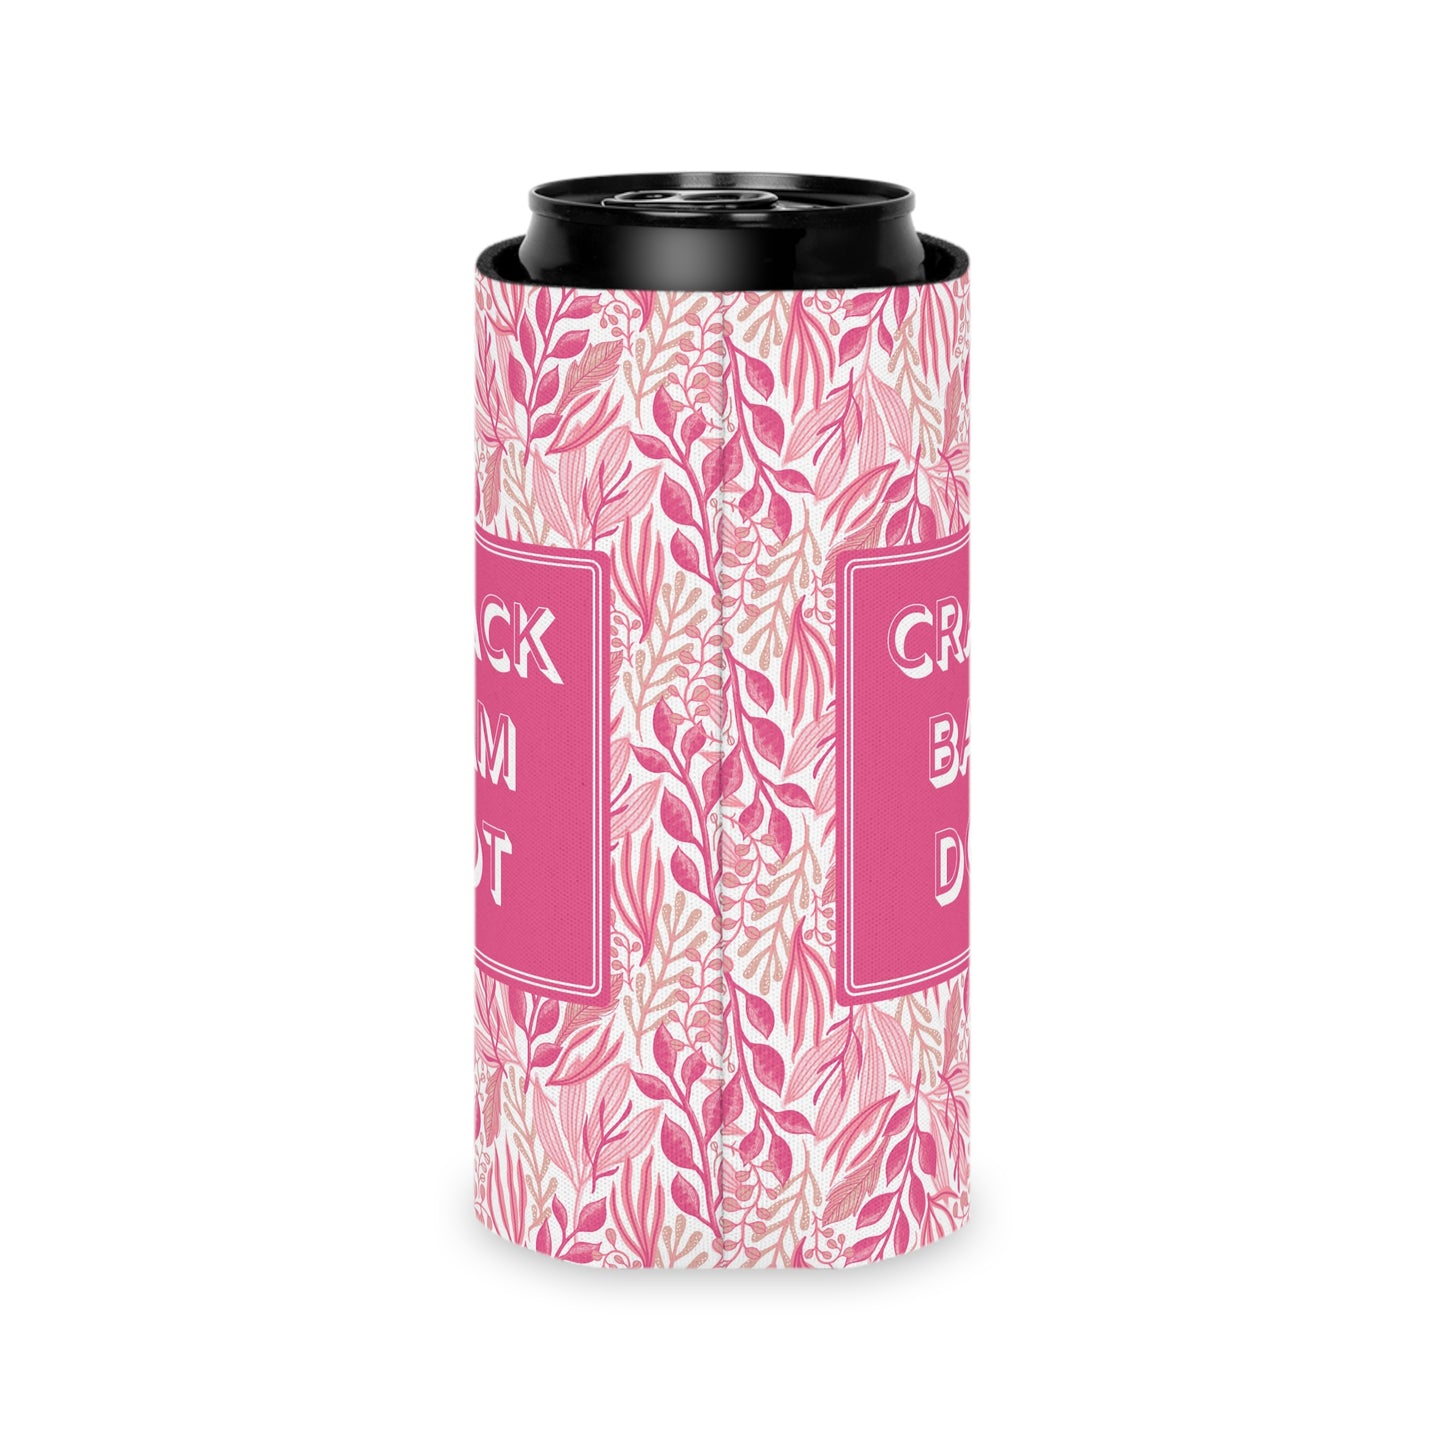 Mahjong Koozie! Perfect Mah-jongg gift for game night, tournaments, parties, gifts or any occasion.